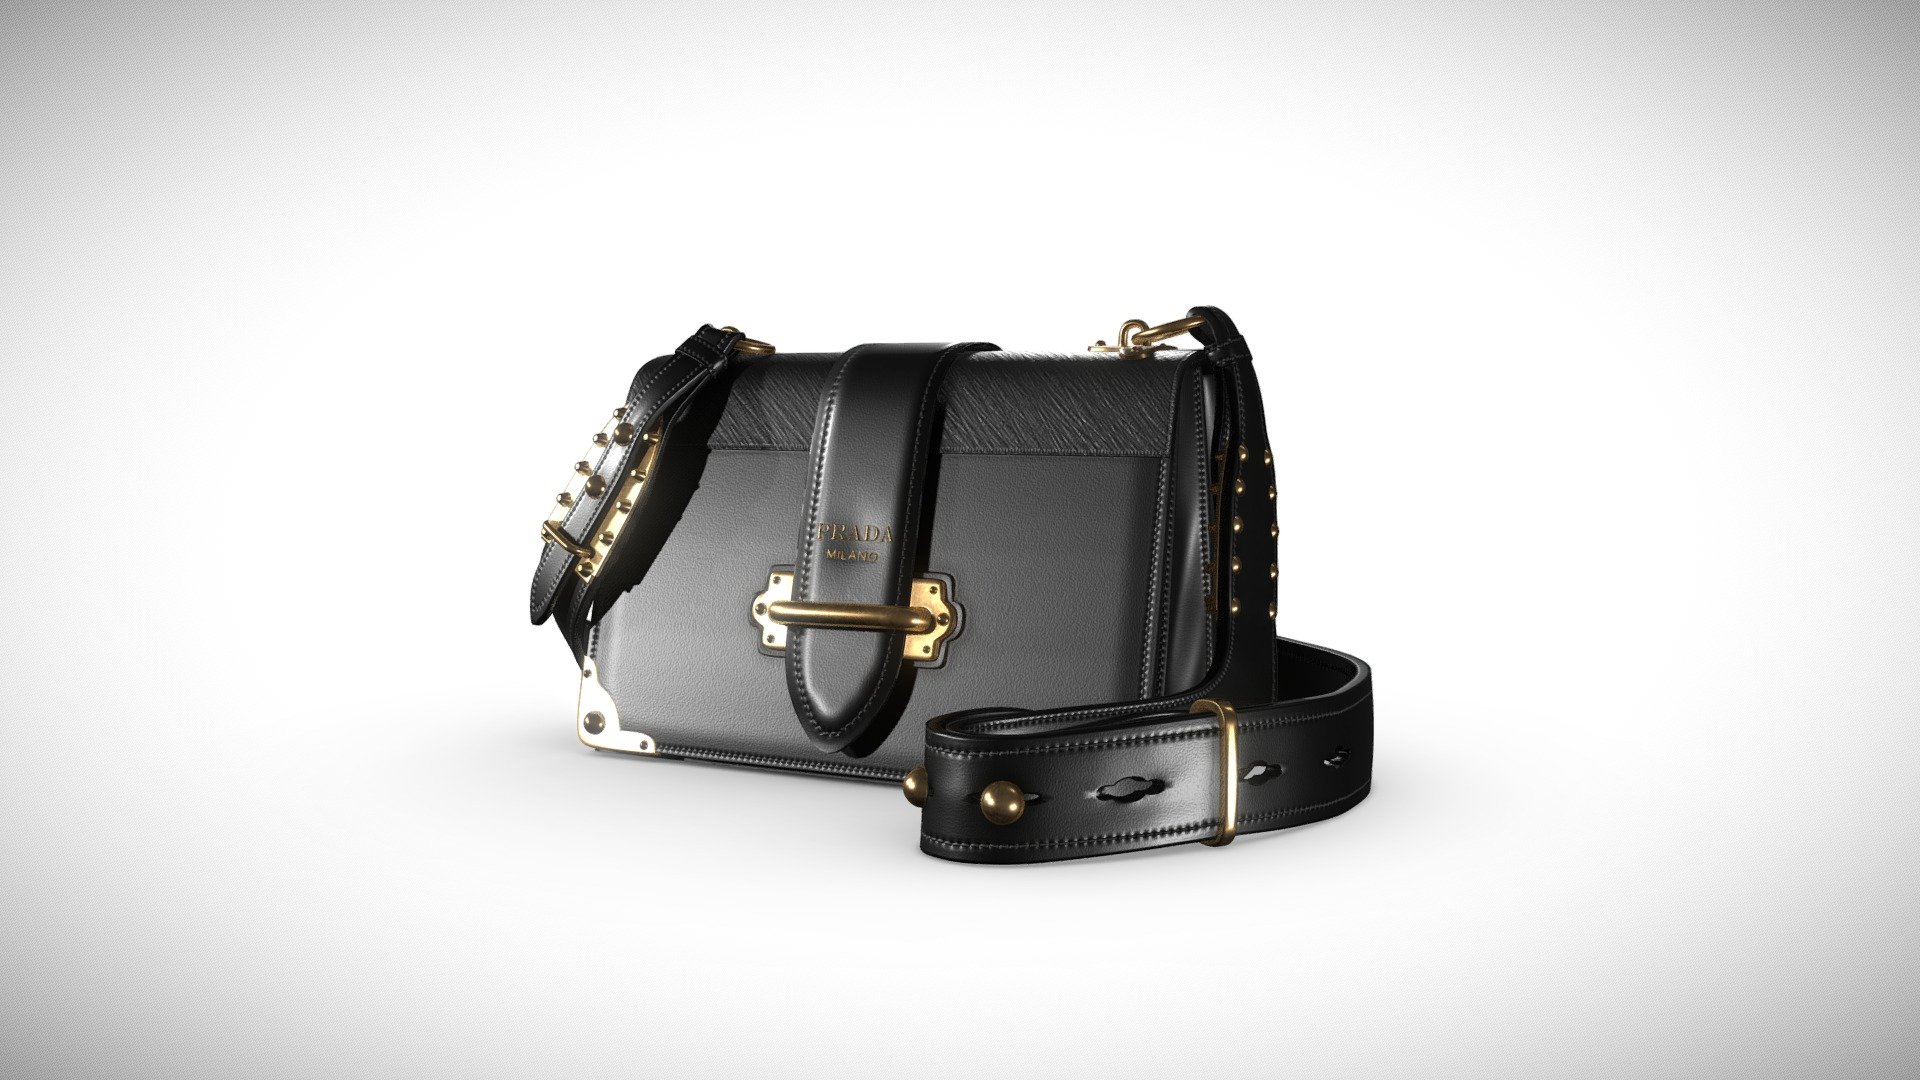 One of PRADA's luxury bags, visualized in 3D.
Based on photographic reference 3d model